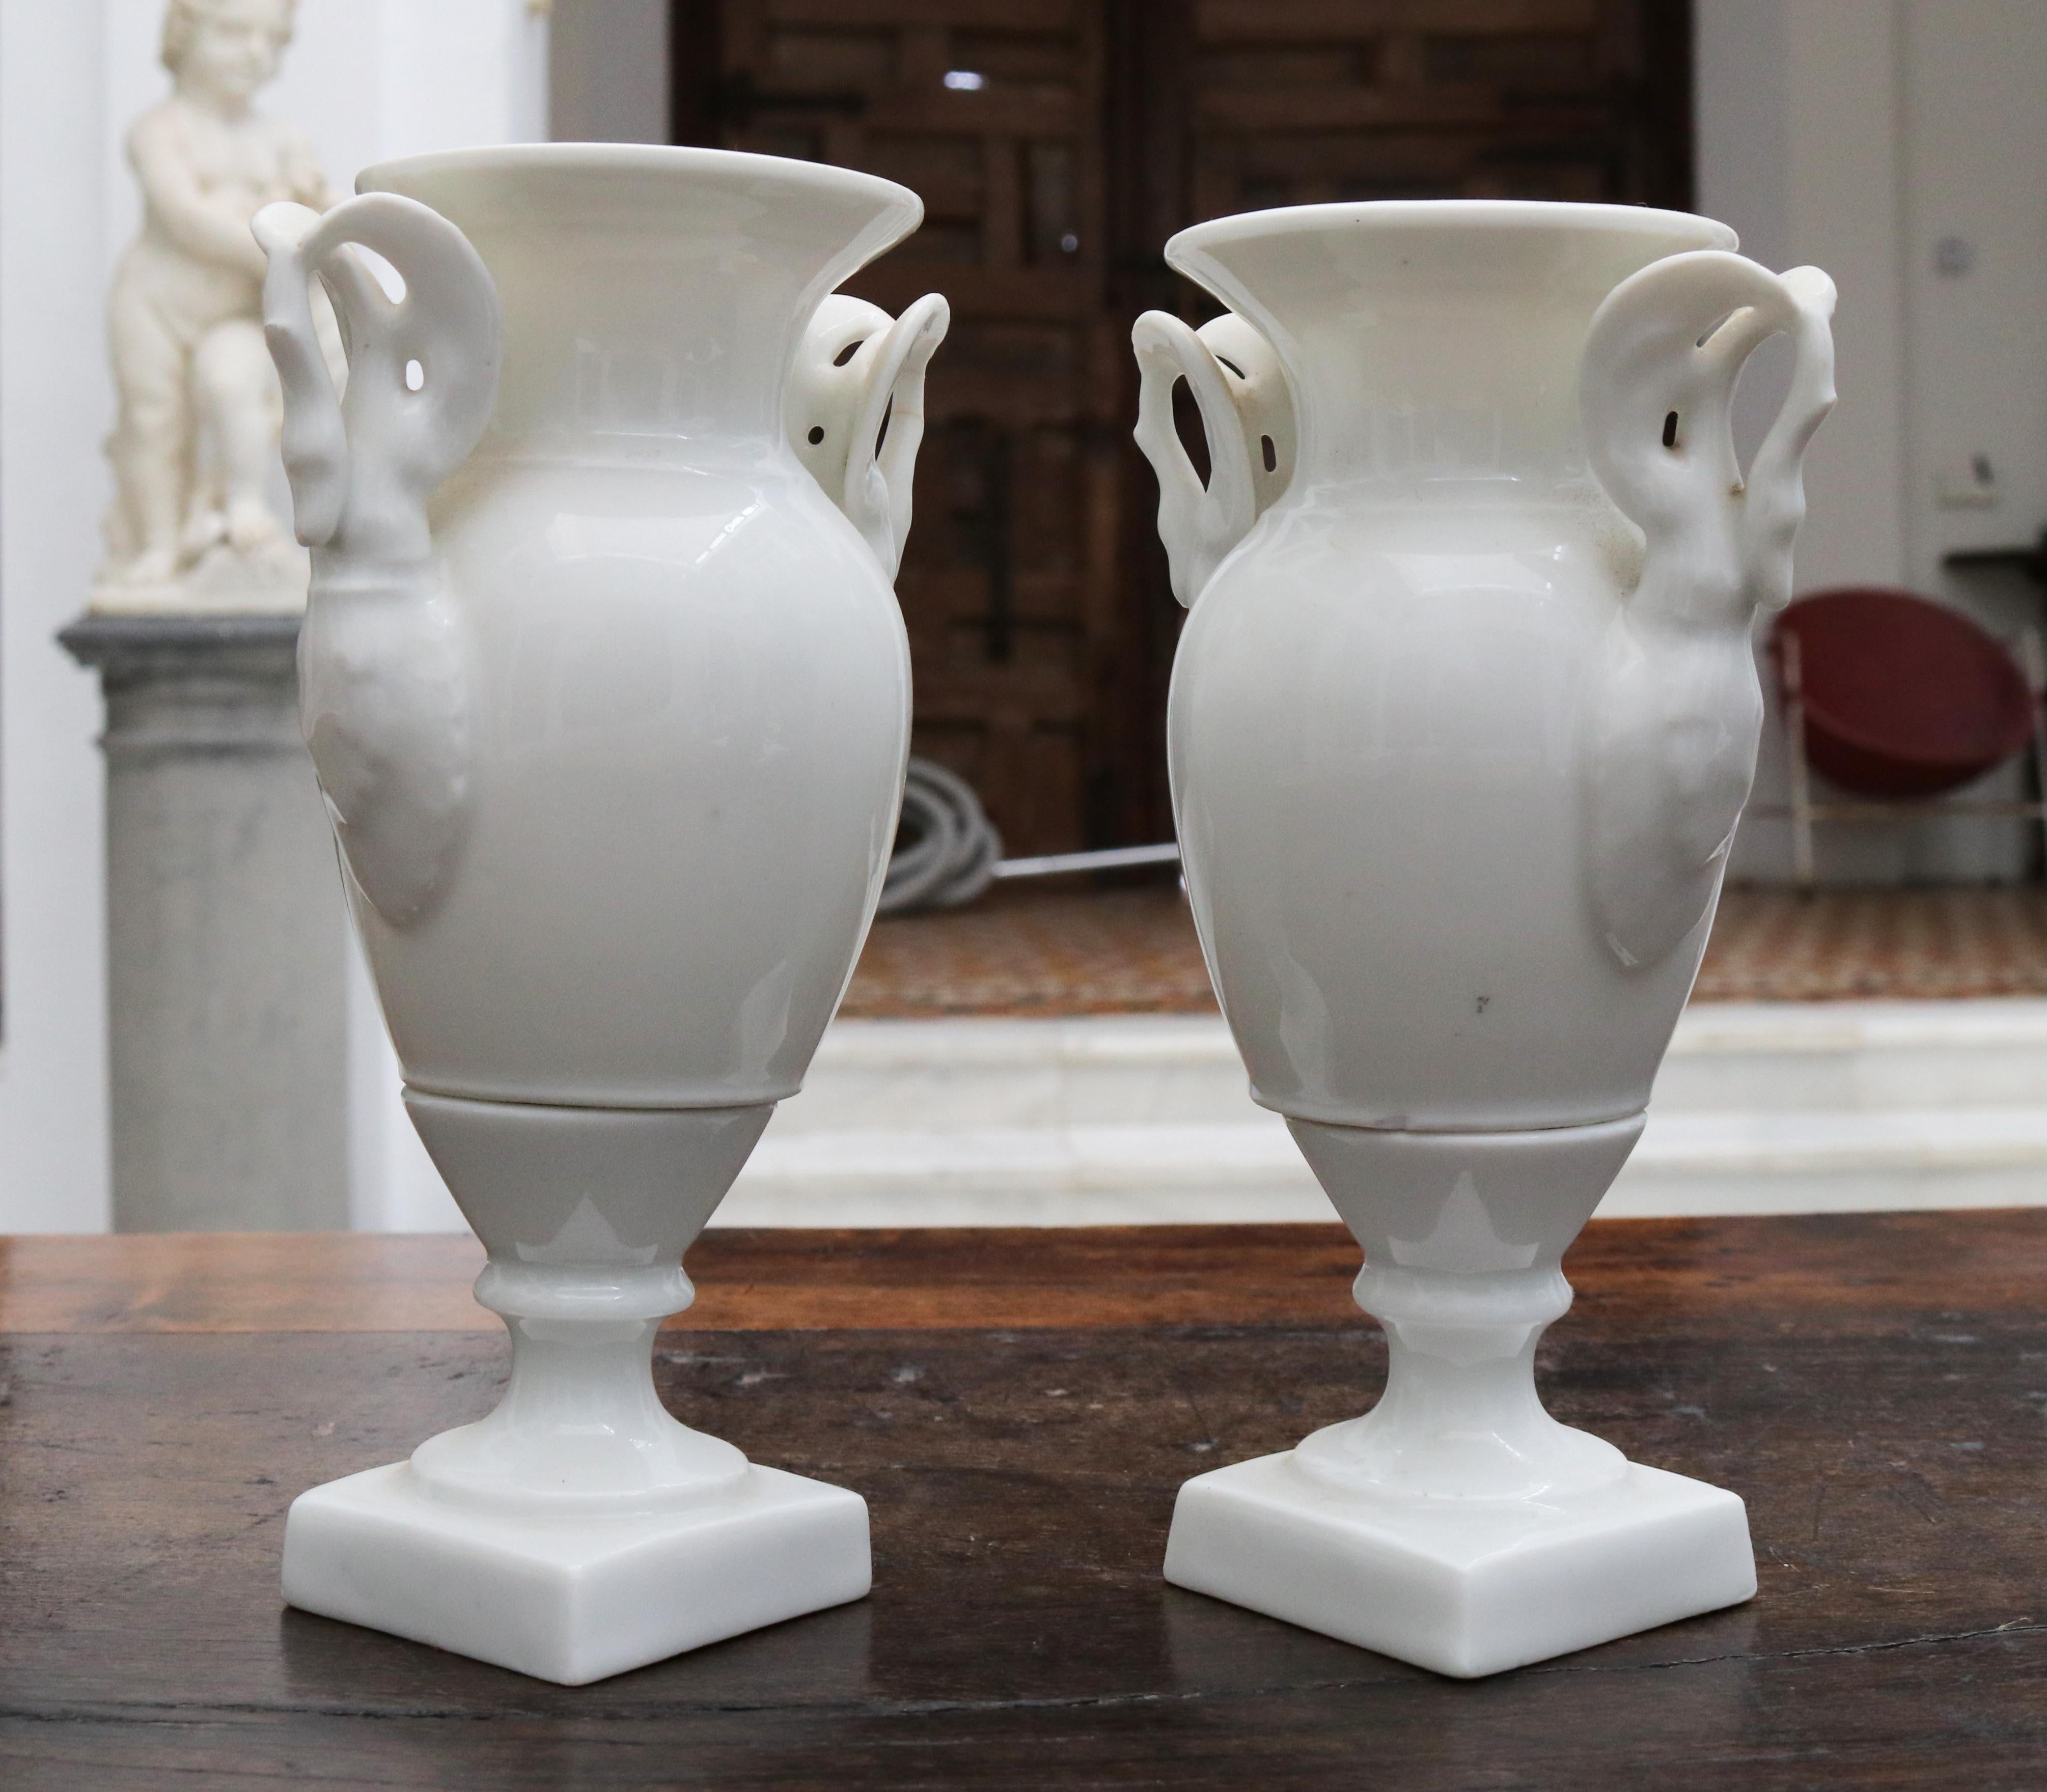 19th Century Pair of French White Porcelain Vases with Swam Shaped Handles 1